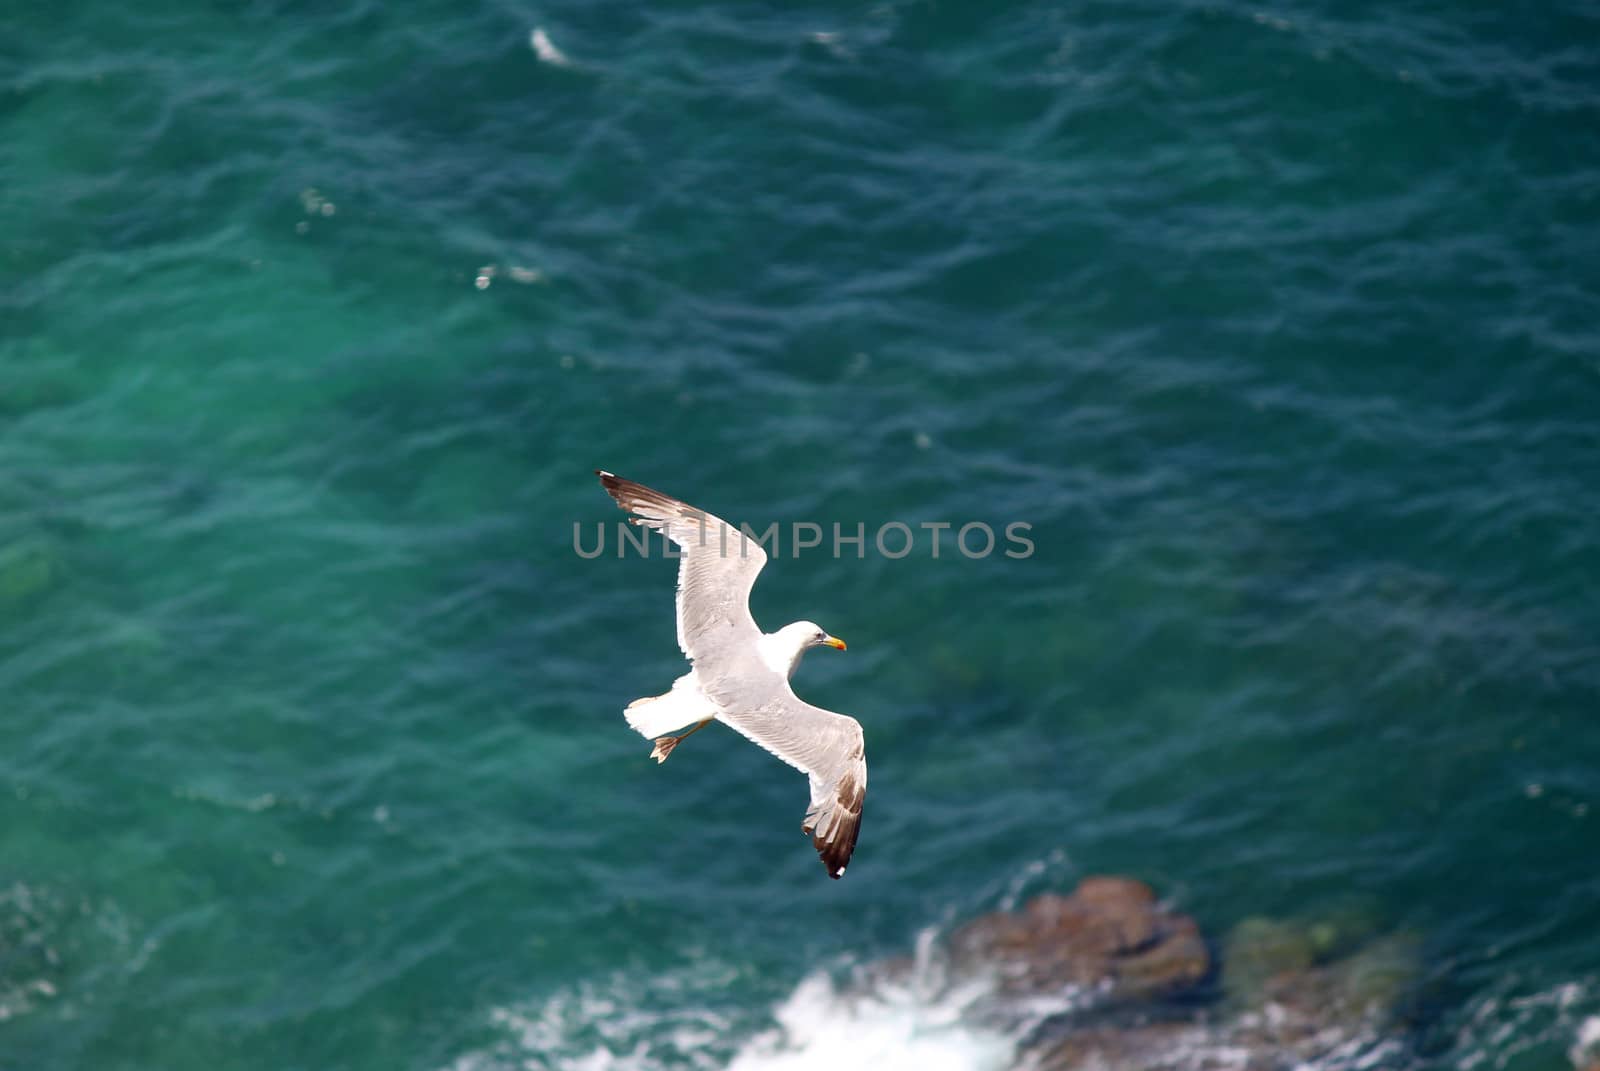 The Yellow-legged Gull (Larus michahellis), in Natural Park of Penon de Ifach situated in Calp, Spain.